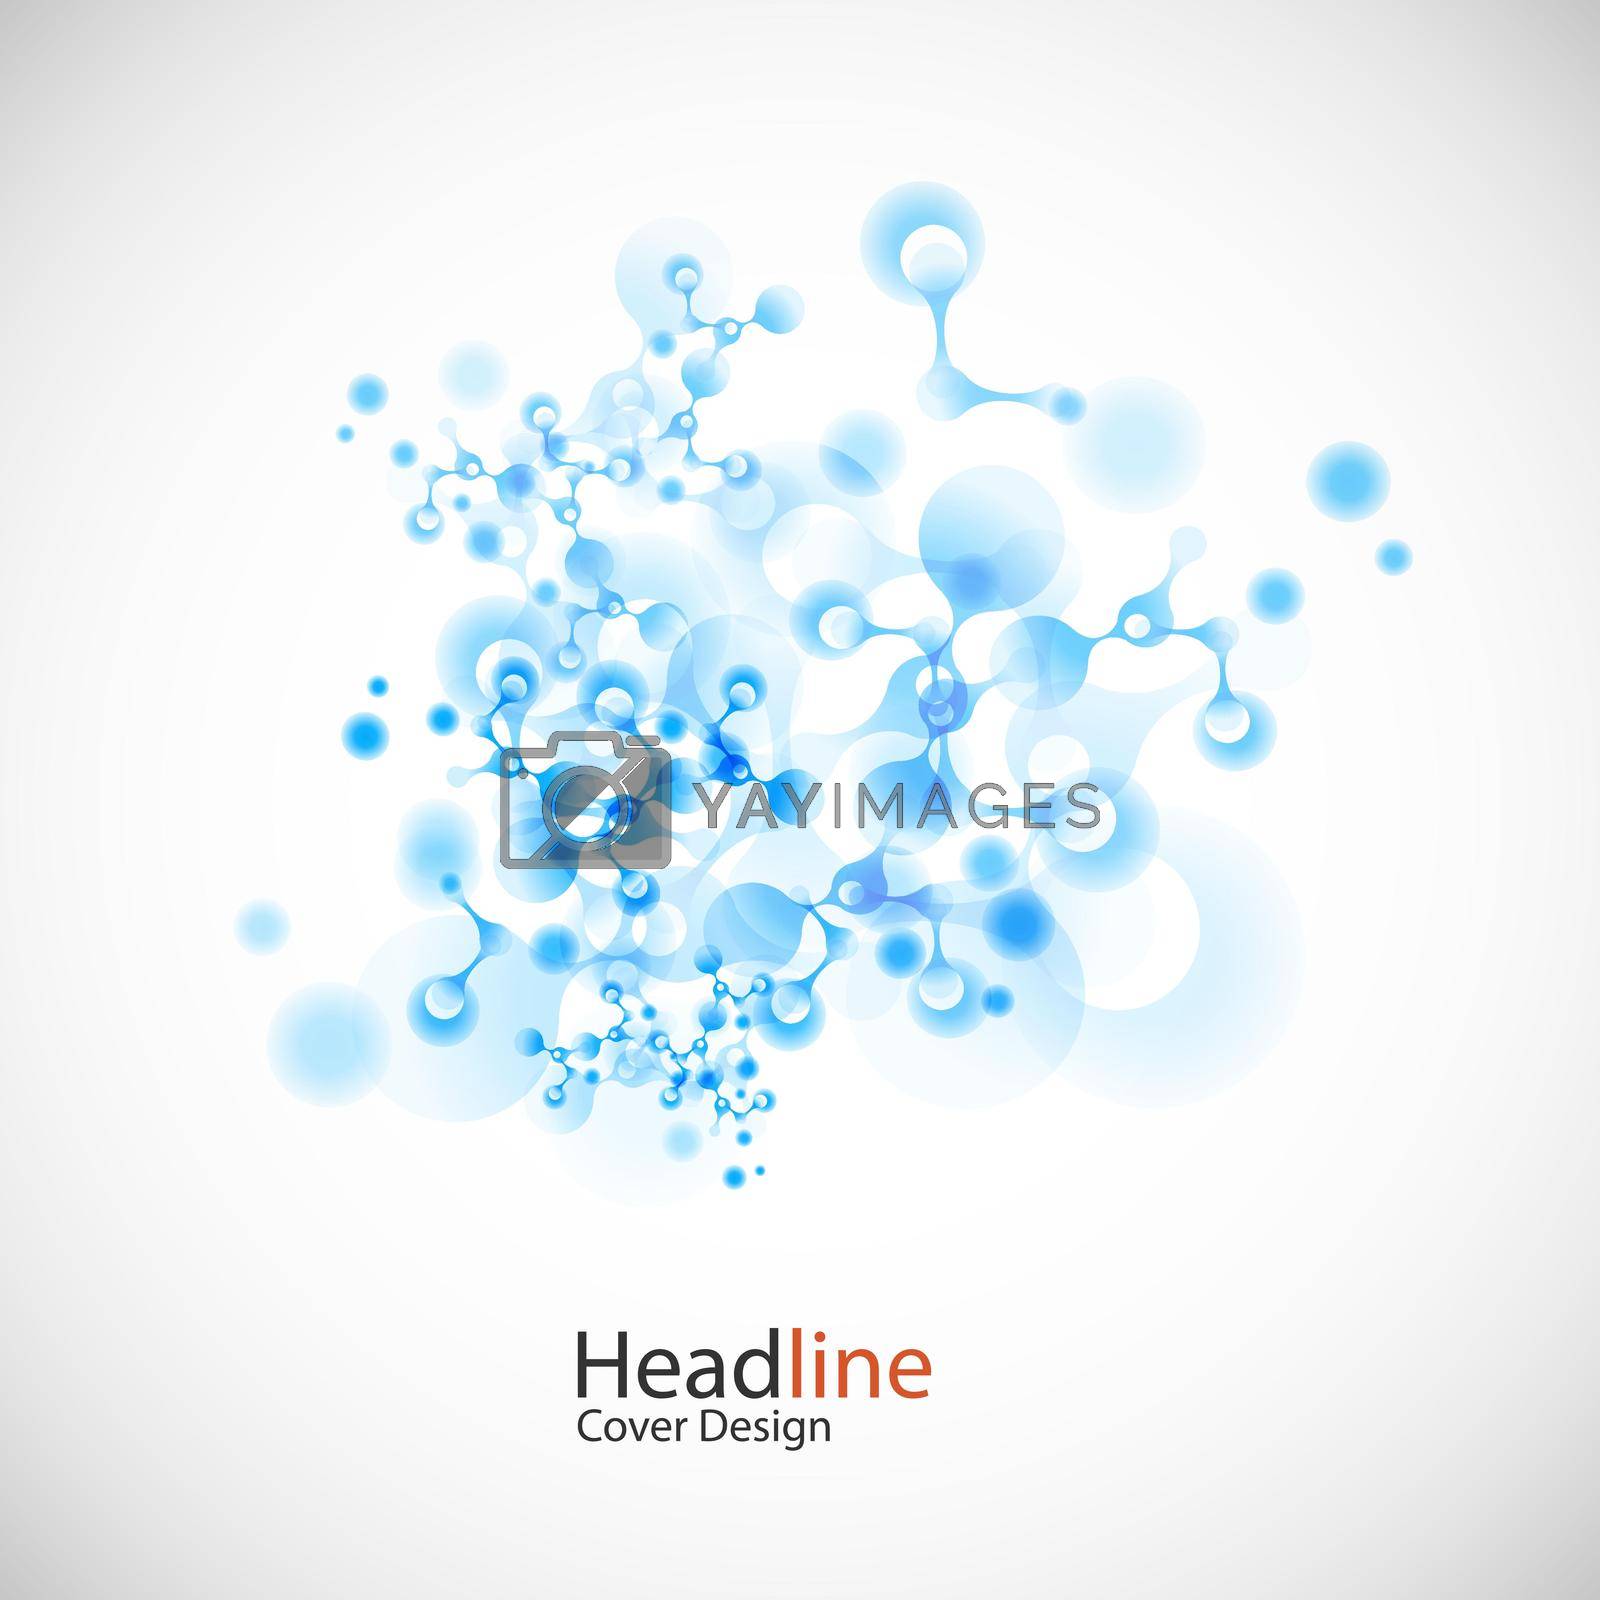 Royalty free image of Vector network connect concept design by Haisonok